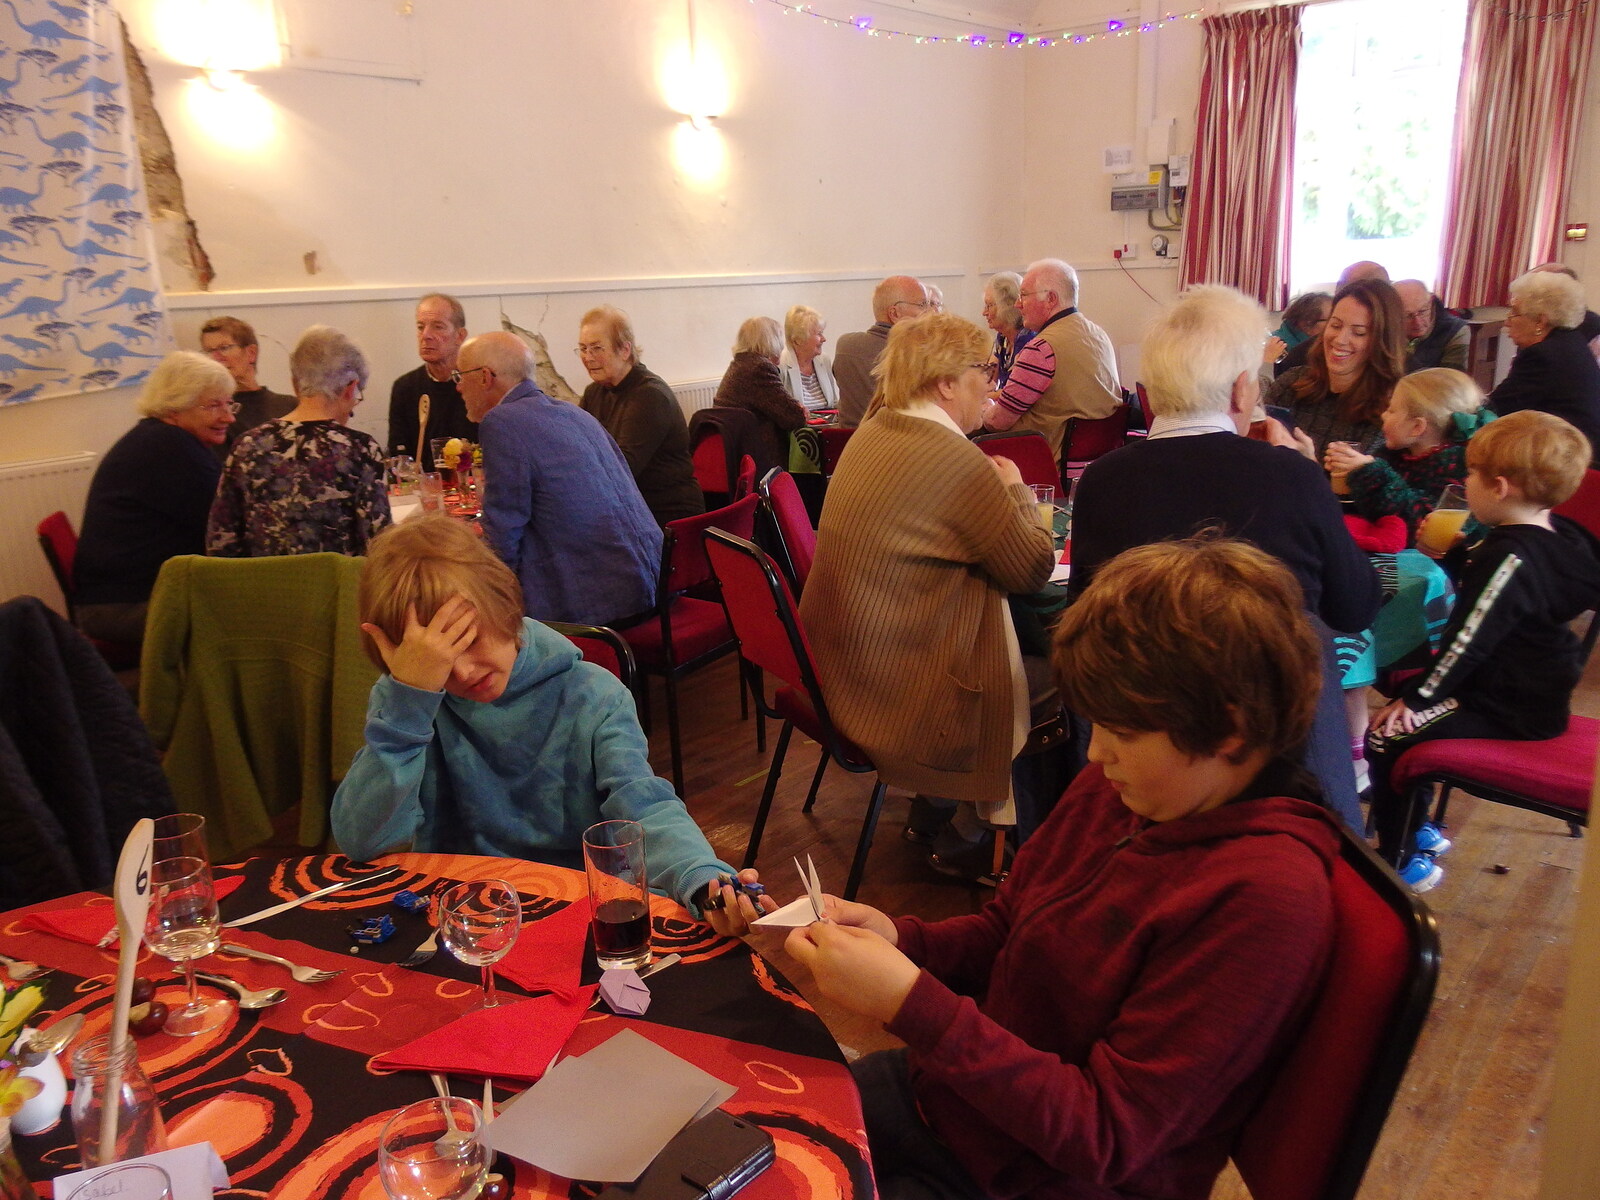 The crowd out for Sunday lunch in the hall from Sunday Lunch at the Village Hall, Brome, Suffolk - 10th October 2021